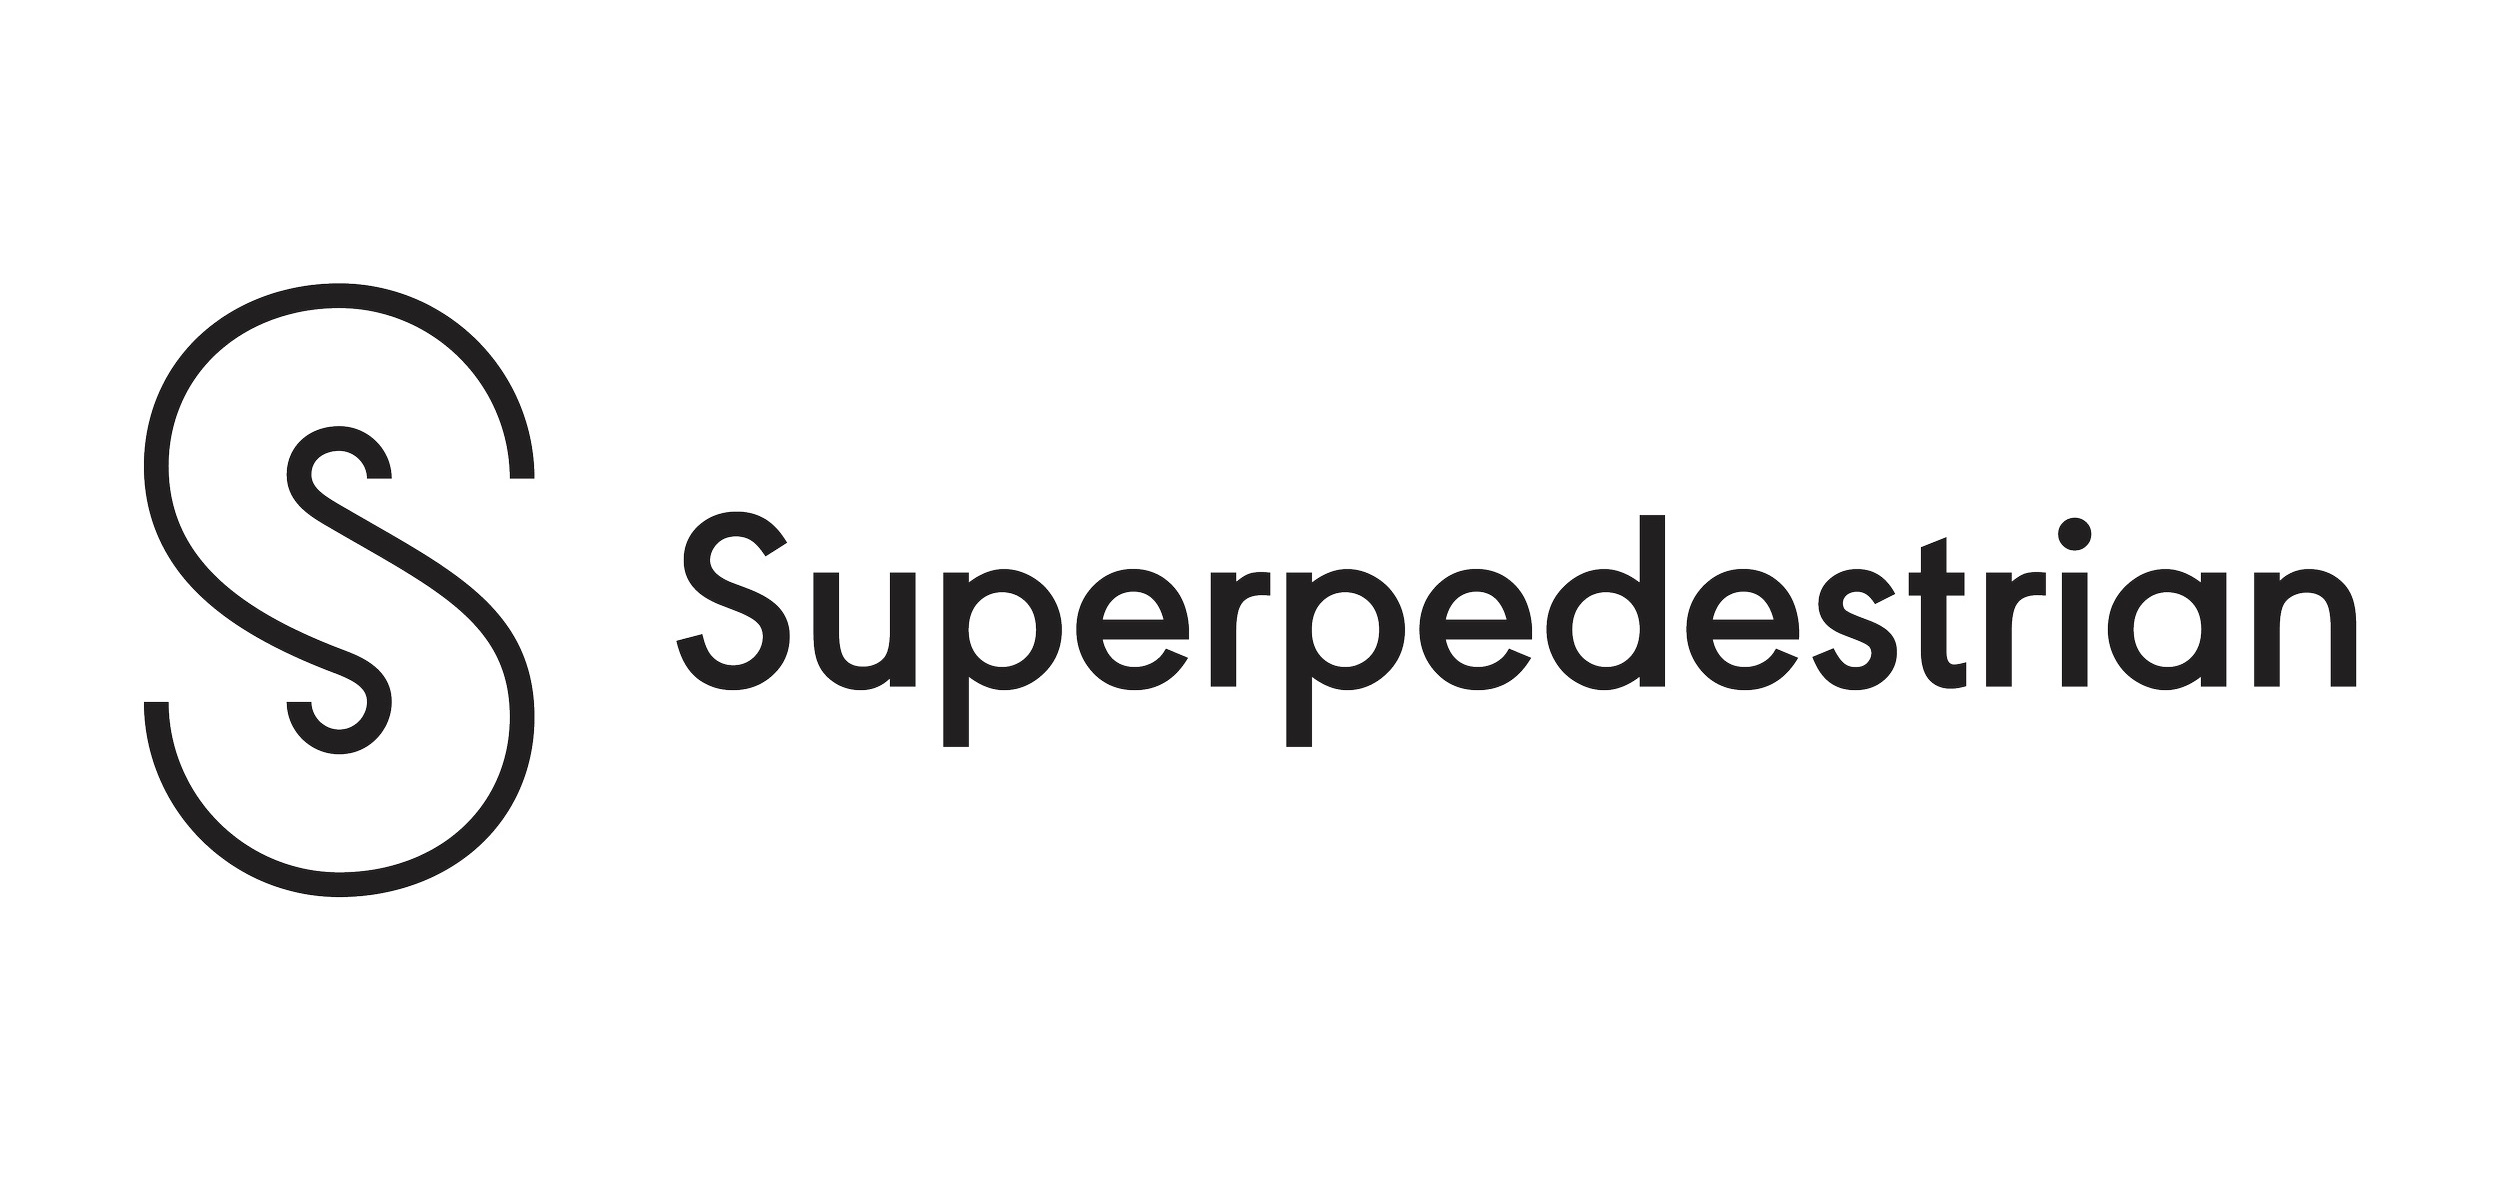 Superpedestrian To Cease U.S. Operations And Explore Sale Of European Business